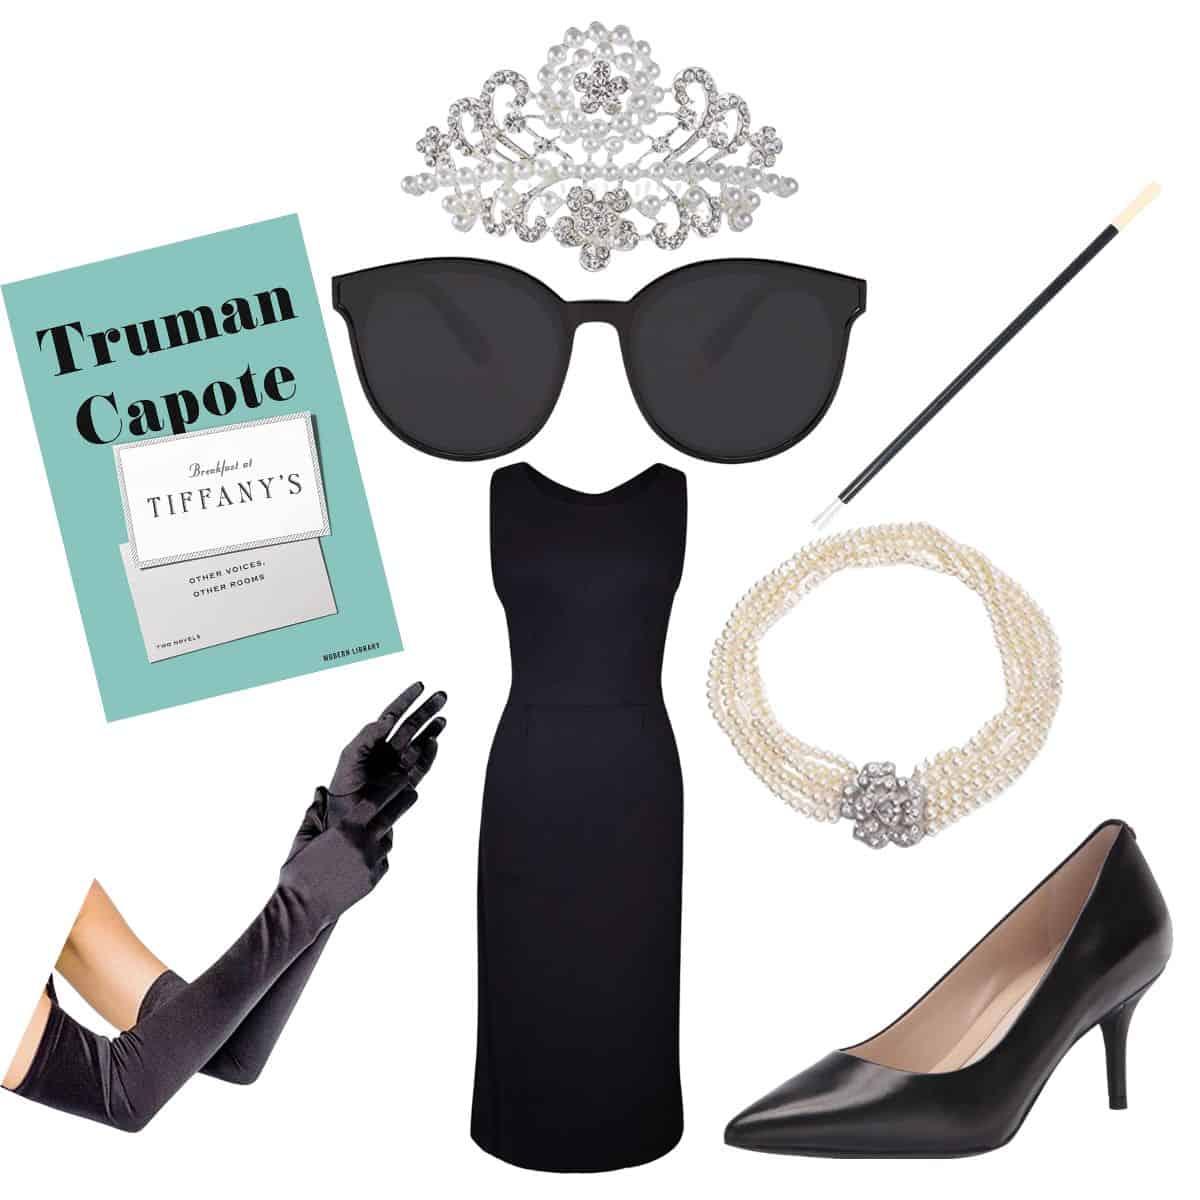 Audrey Hepburn Breakfast at Tiffany’s Costume as Holly Golightly